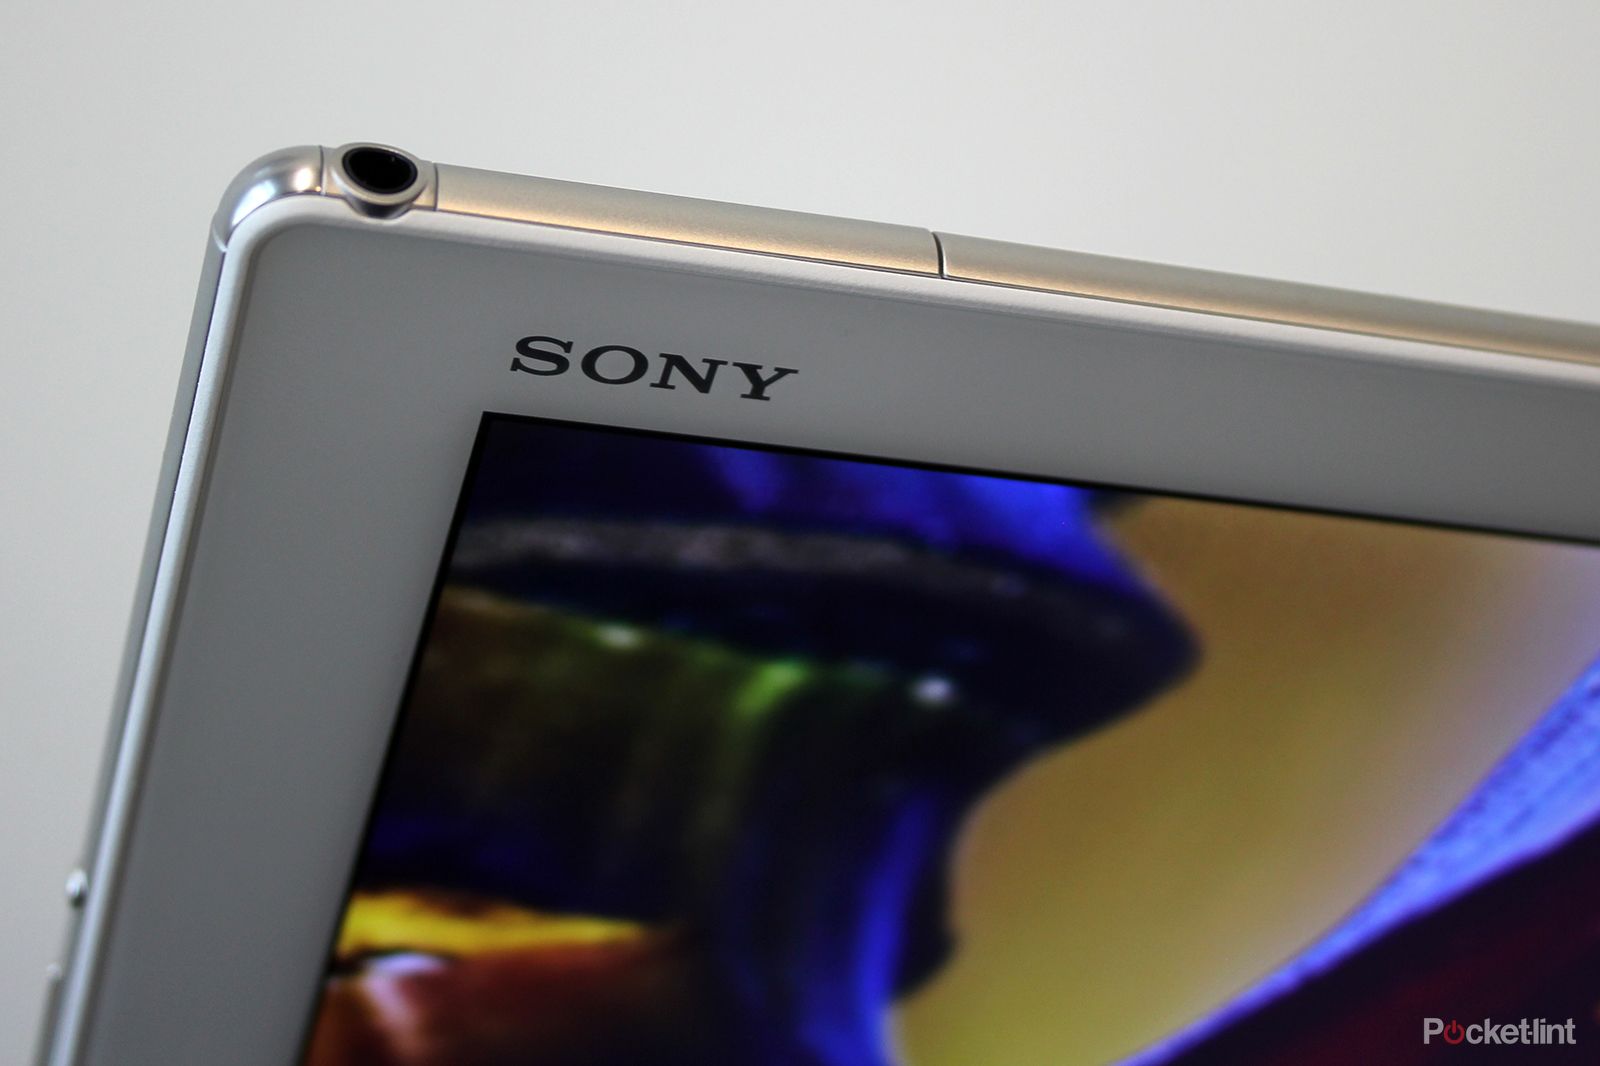 sony xperia z4 tablet hands on slimmer lighter and sexier image 6